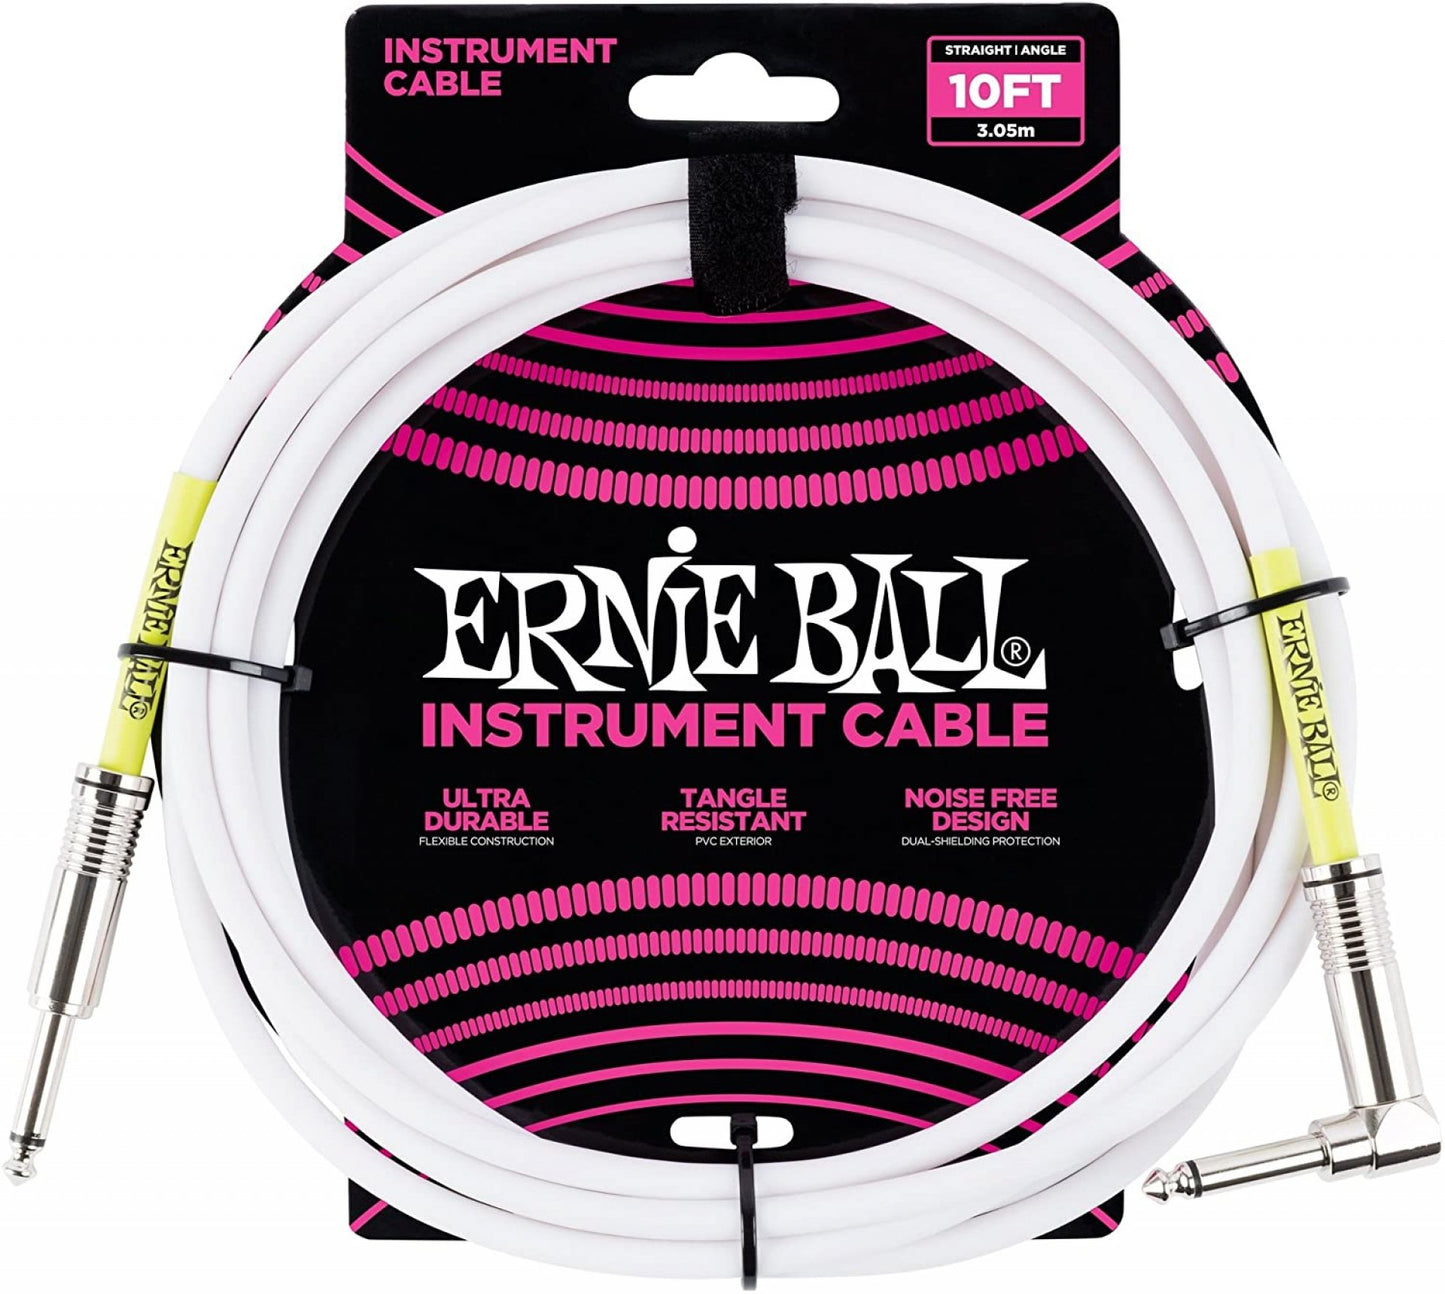 Ernie Ball 6049 Ultraflex 10' Straight/Angle Instrument Cable, Whit